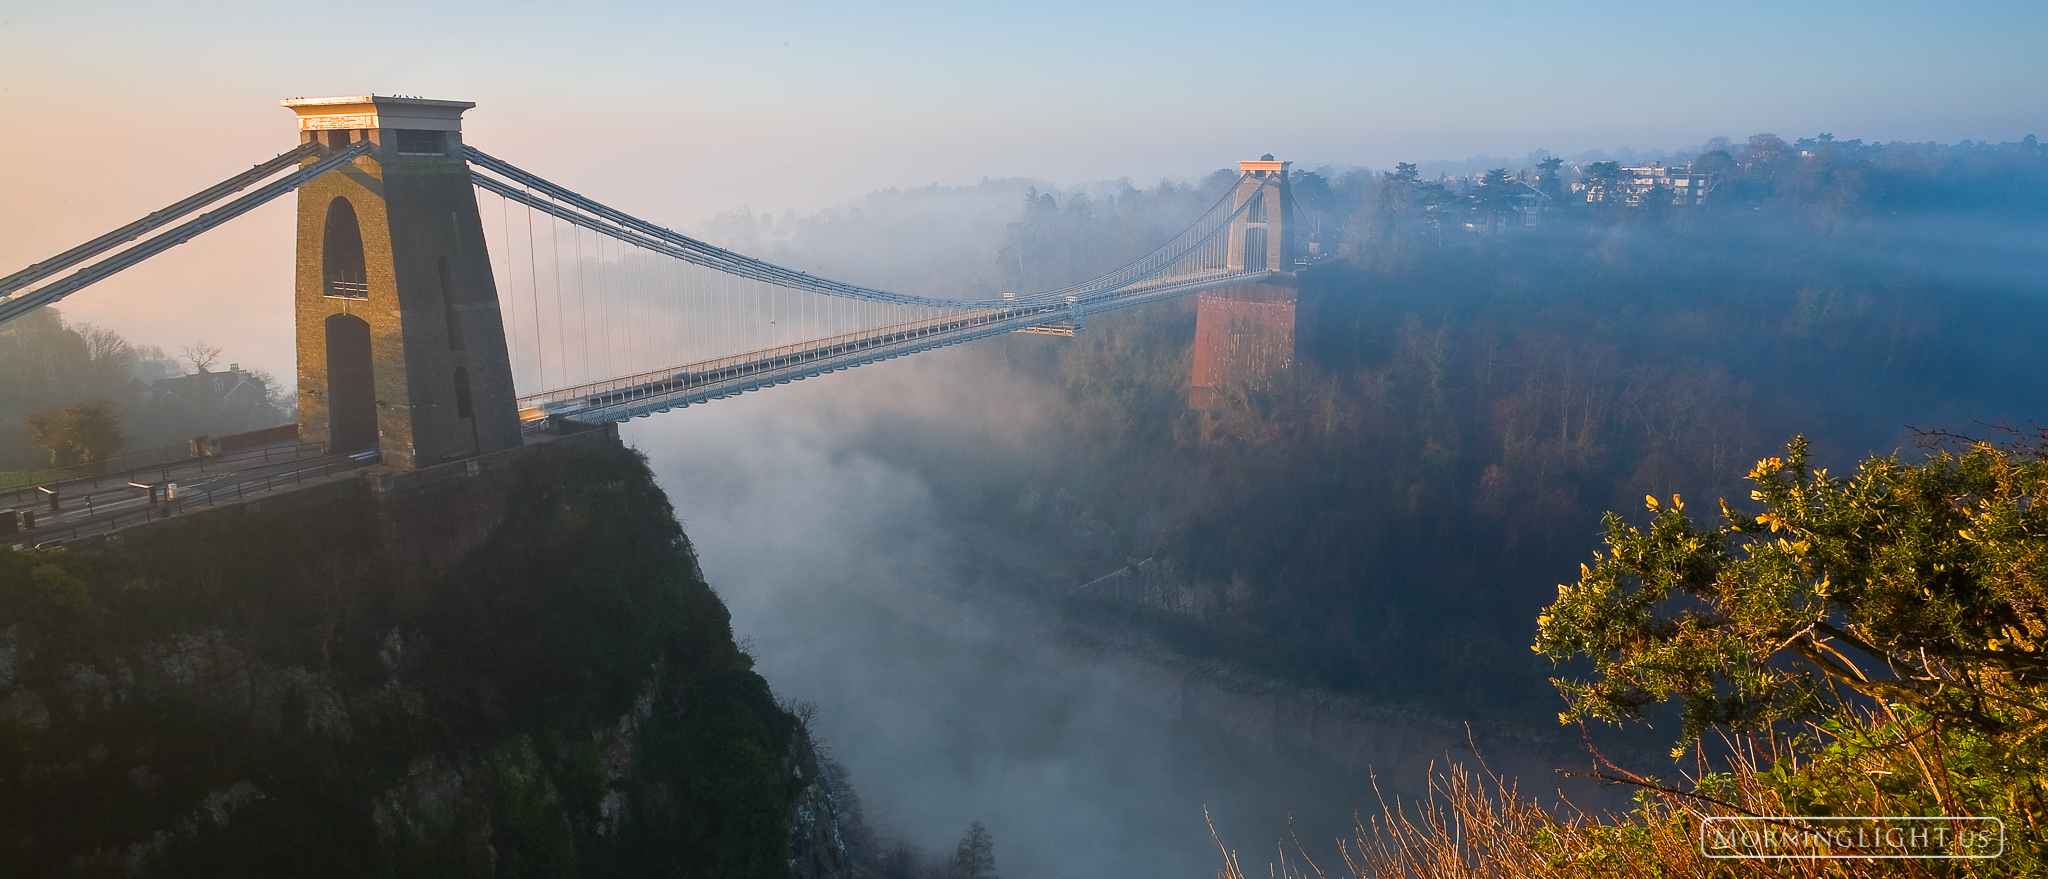 Sunrise and fog at the Clifton Suspension Bridge in Bristol, England. (This is also available in standard, non-panoramic, sizes...